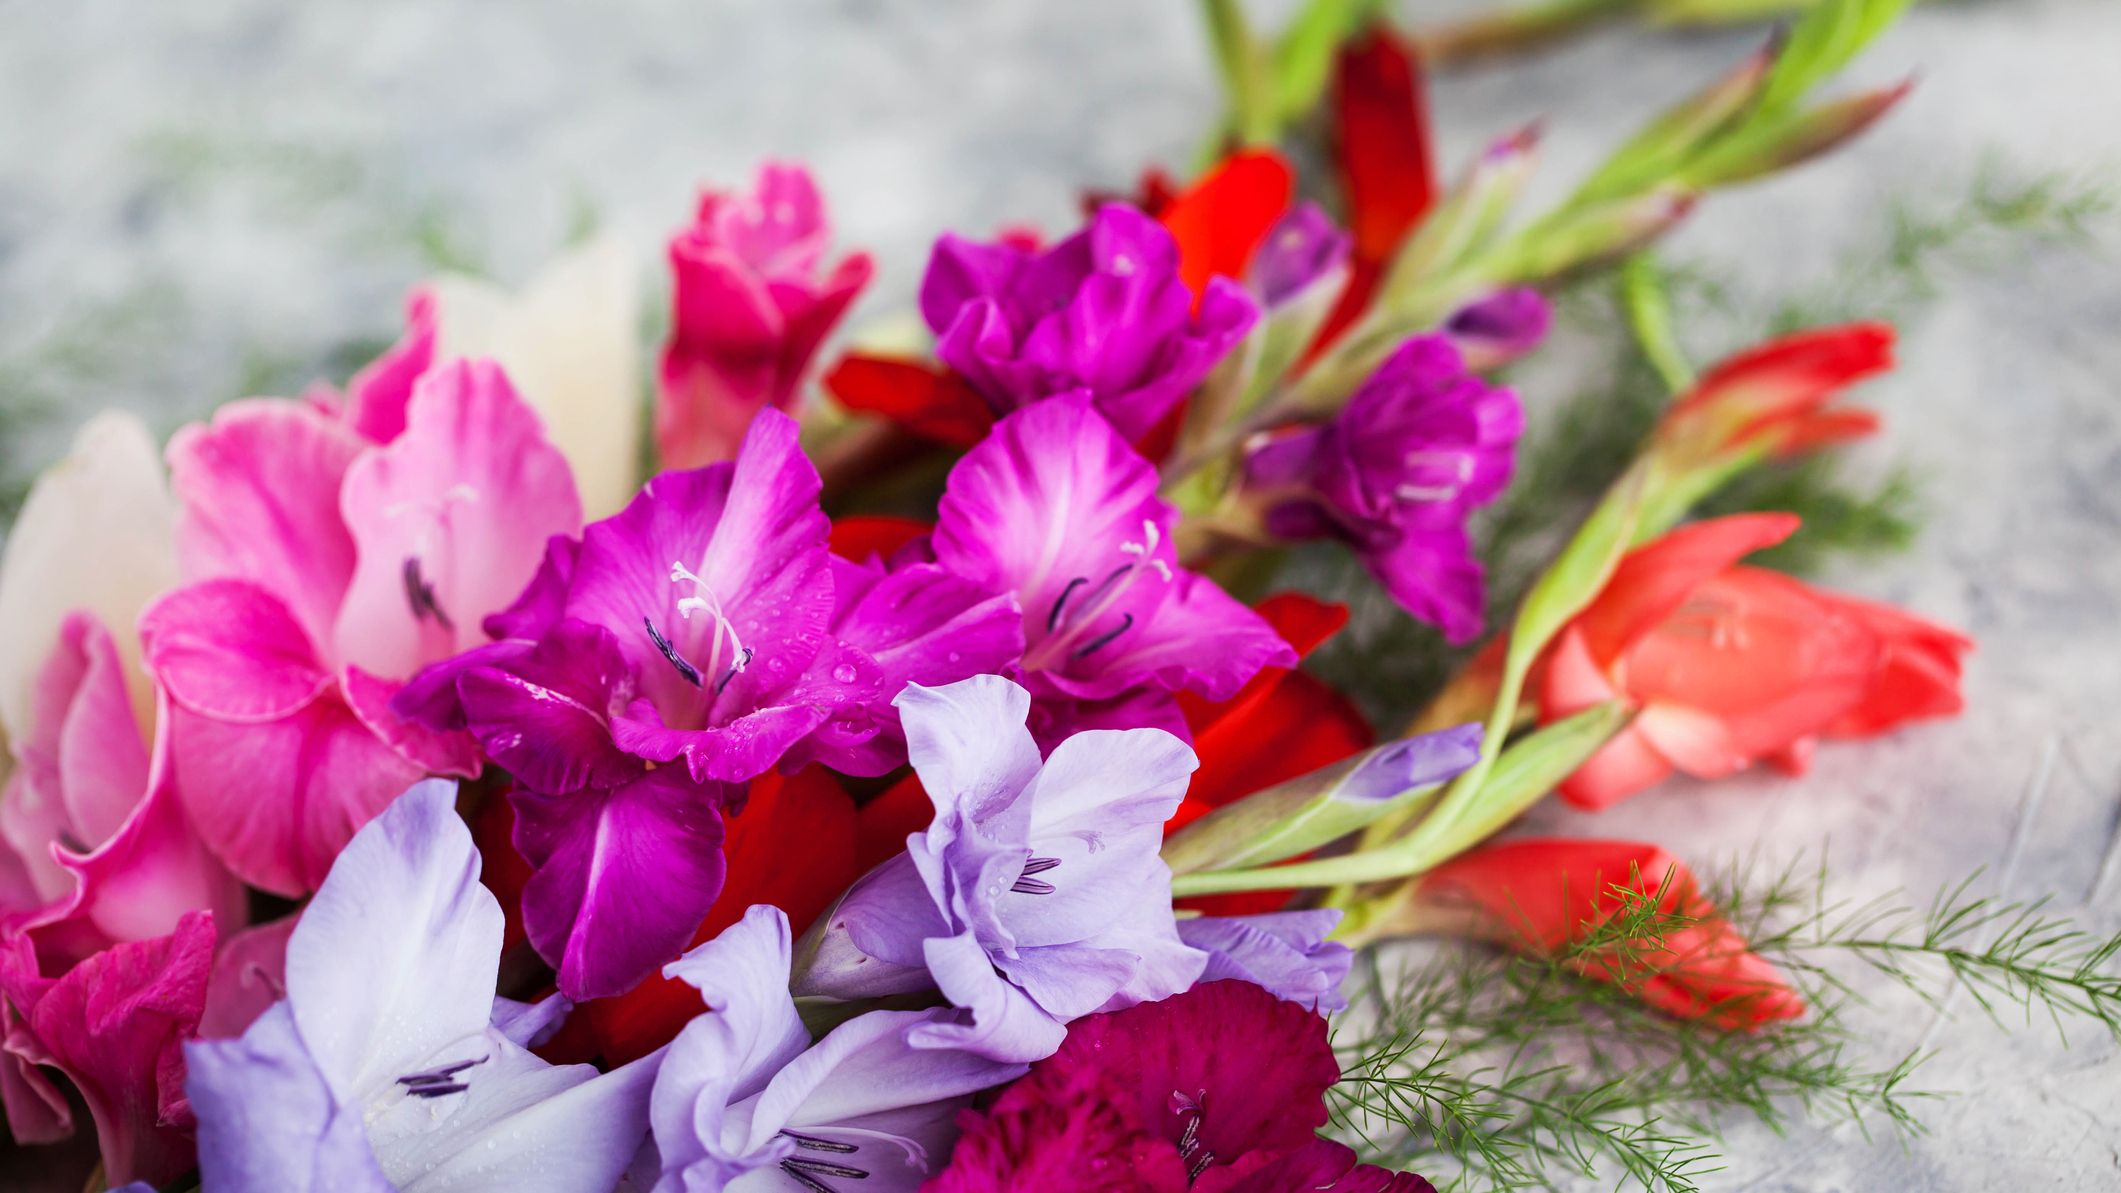 Birthday flowers: The best blooms to give on a special day